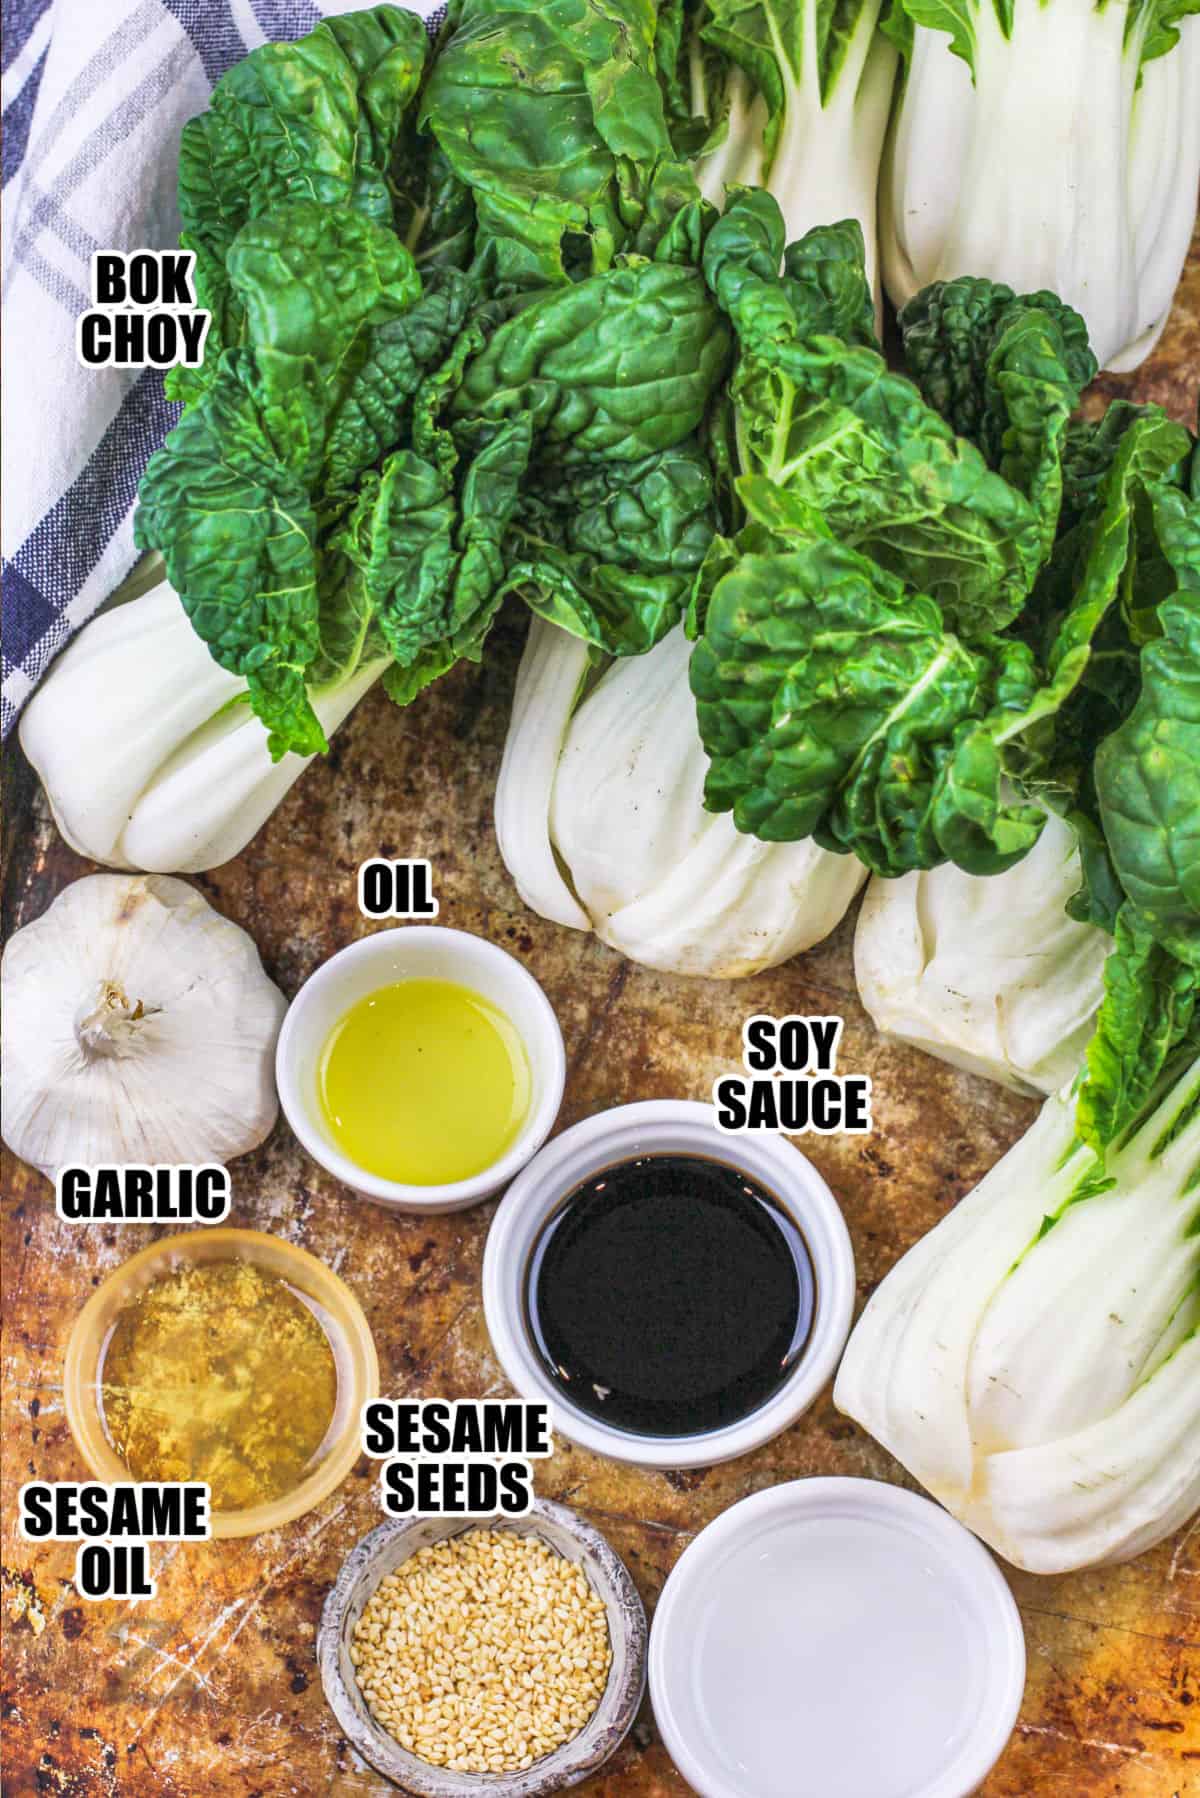 bok choy, oil, soy sauce, garlic, sesame oil and sesame seeds assembled to make a garlic baby bok choy recipe